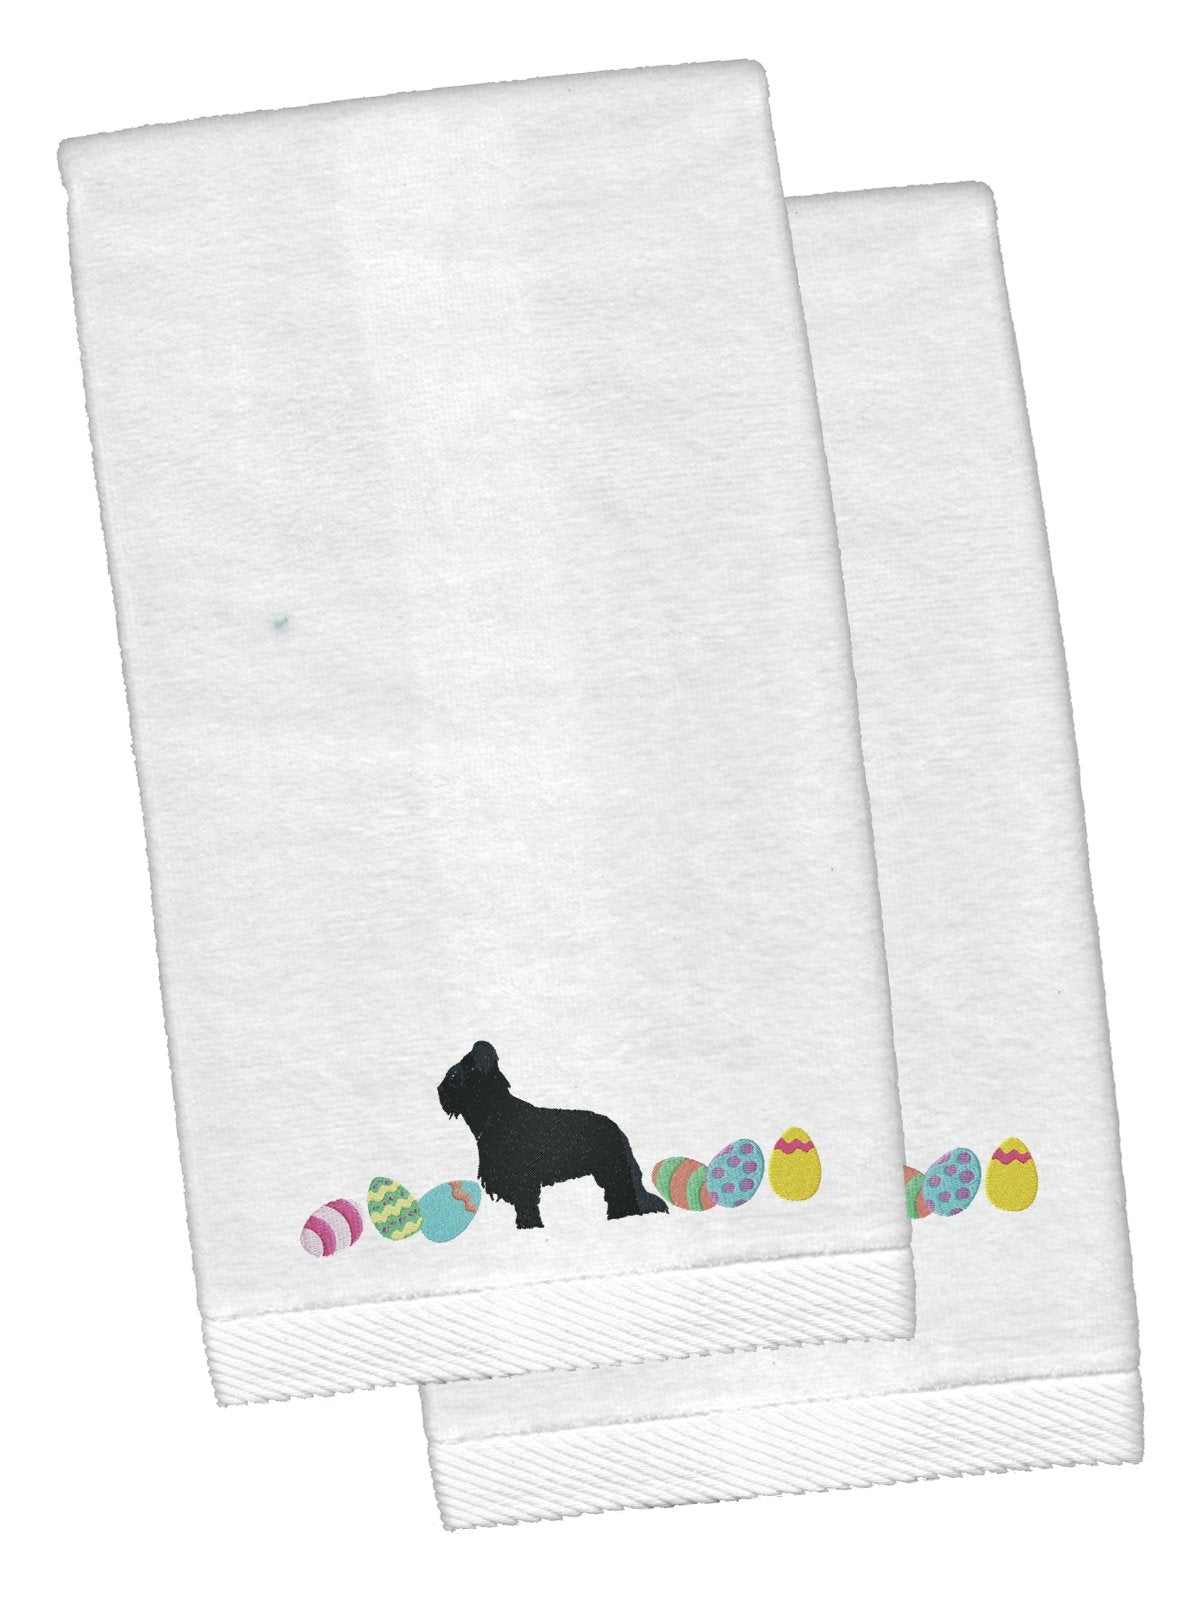 Briard Easter White Embroidered Plush Hand Towel Set of 2 CK1616KTEMB by Caroline's Treasures